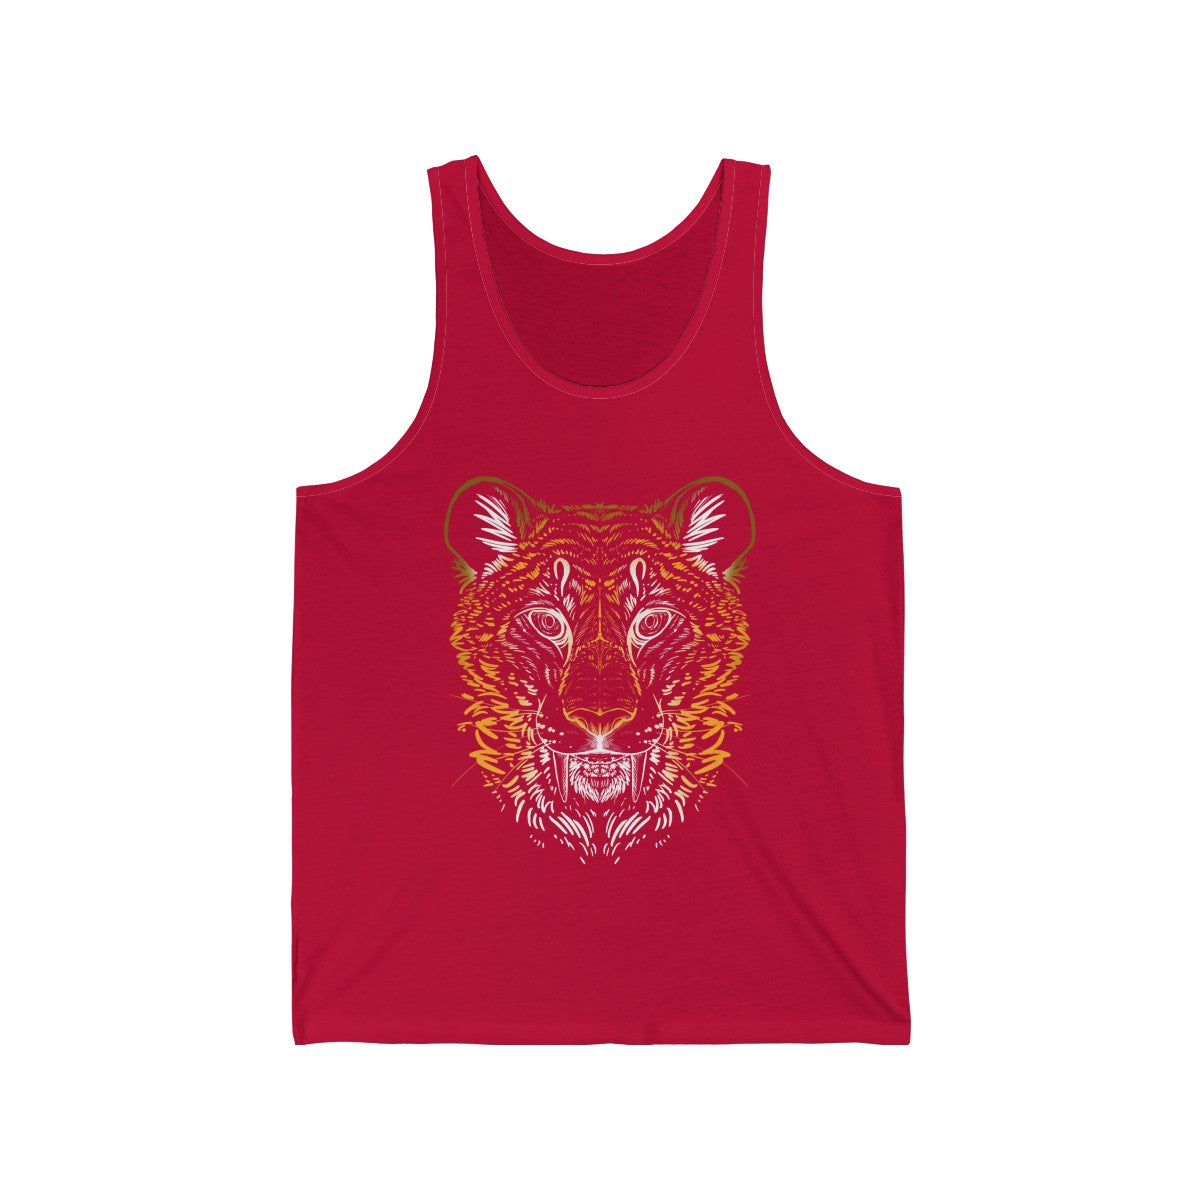 Sabertooth Colored - Tank Top Tank Top Dire Creatures Red XS 